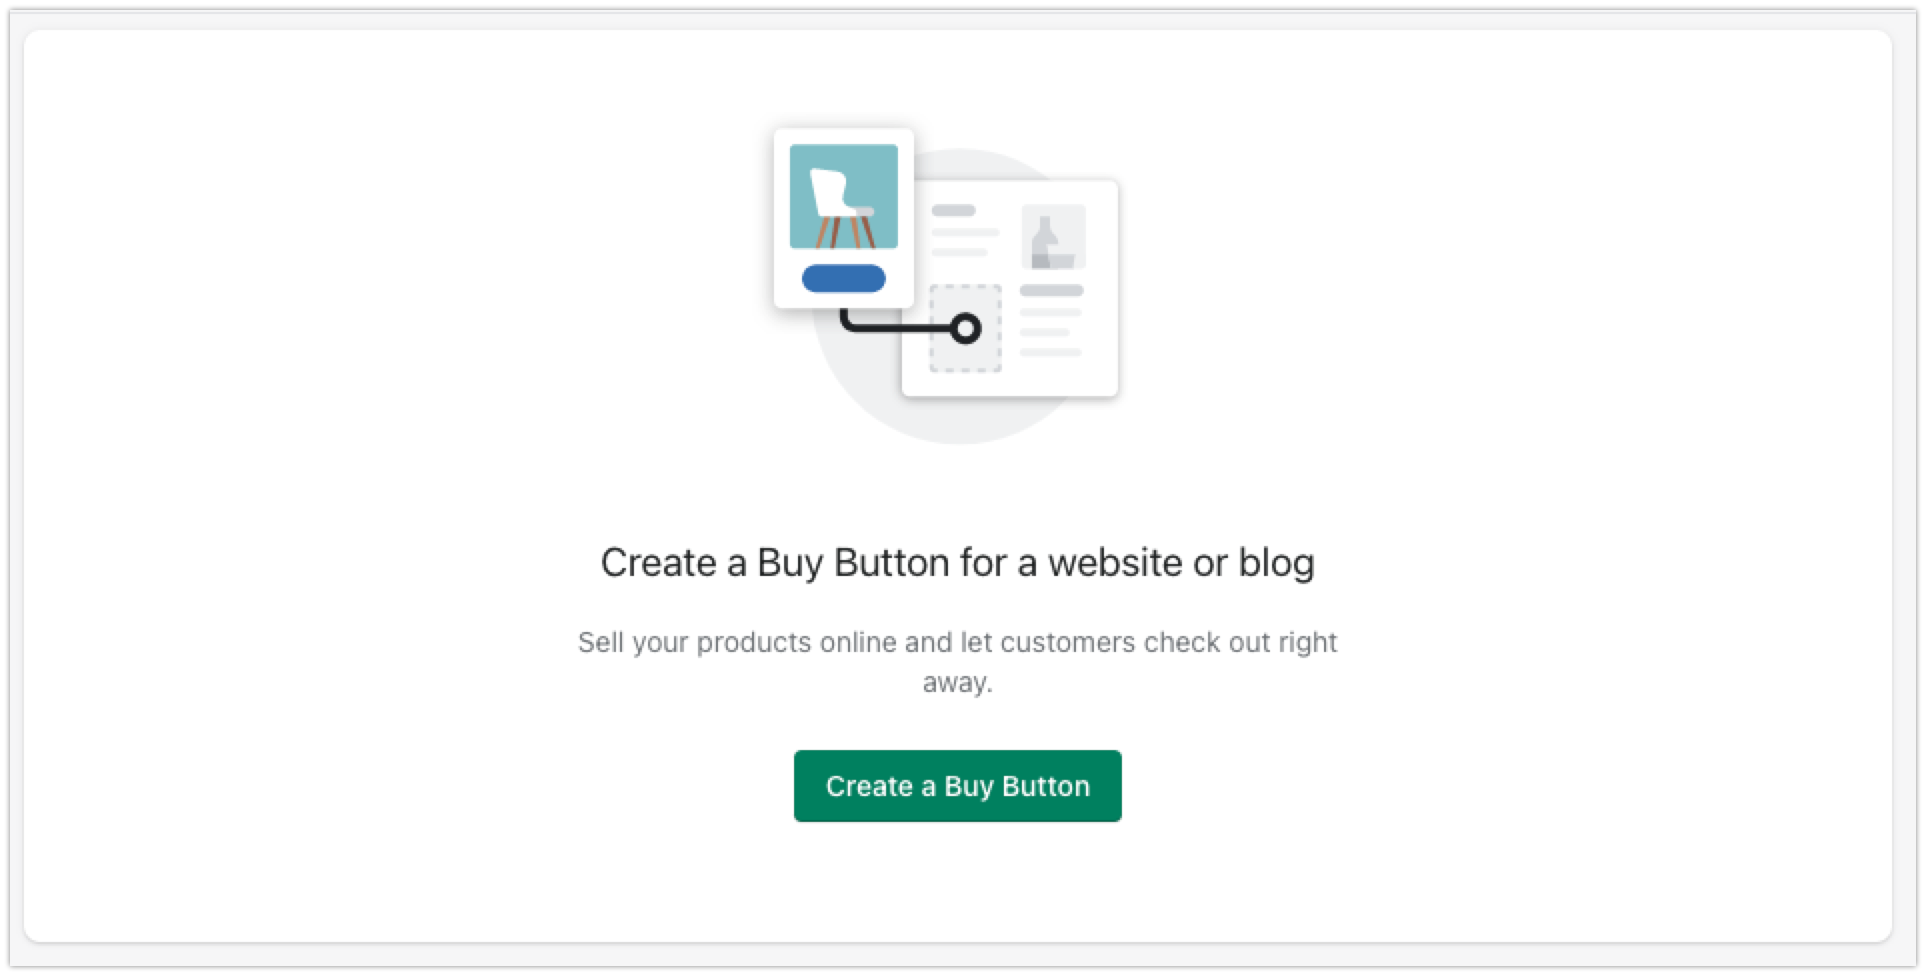 Create a Buy Button screen in the Shopify Admin